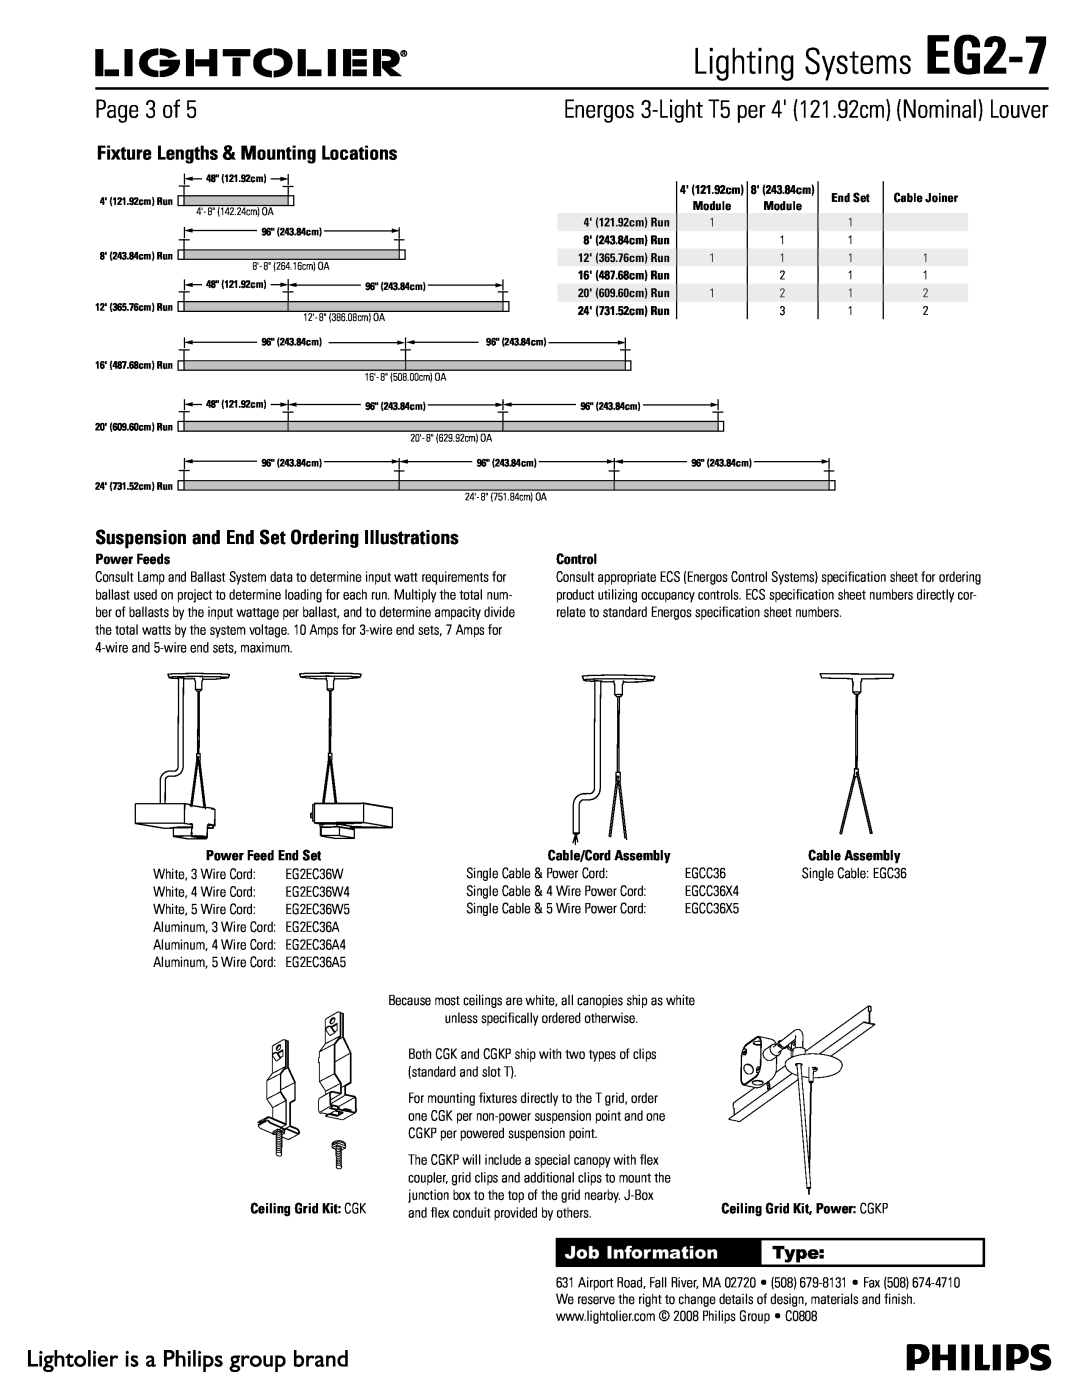 Lightolier Lighting Systems EG2-7, 1BHFPG, Job Information, Type, End Set, Cable Joiner, Cable/Cord Assembly 